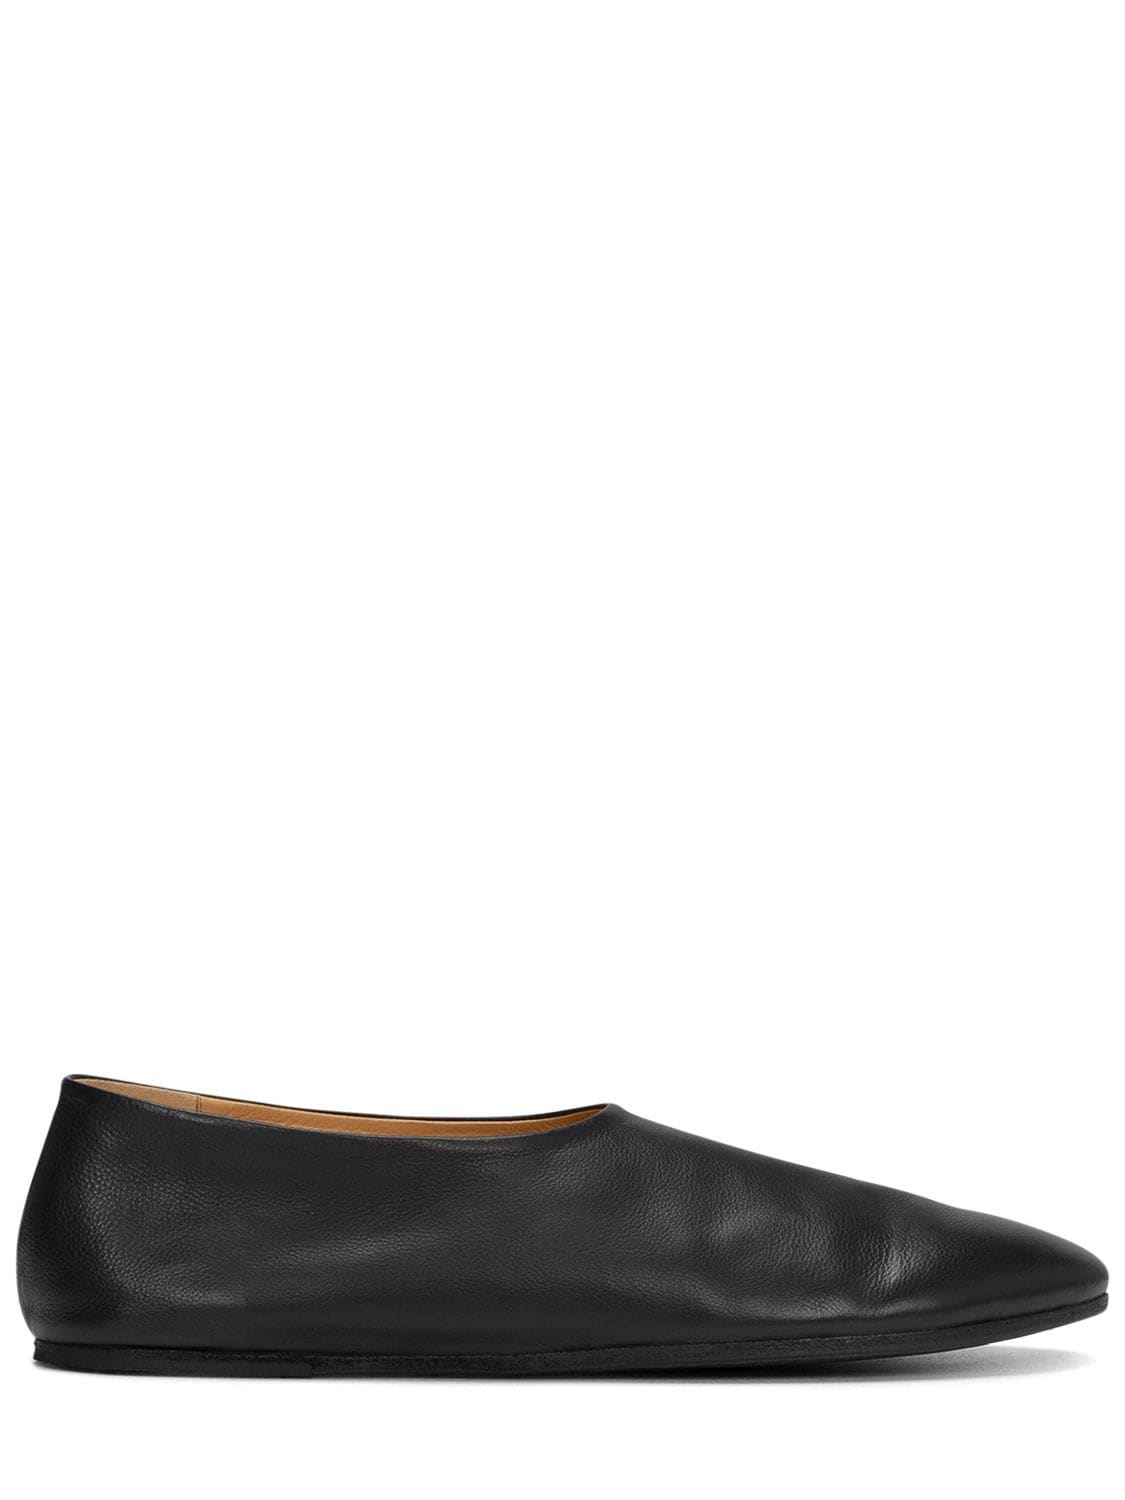 Image of Coltellaccio Leather Loafers